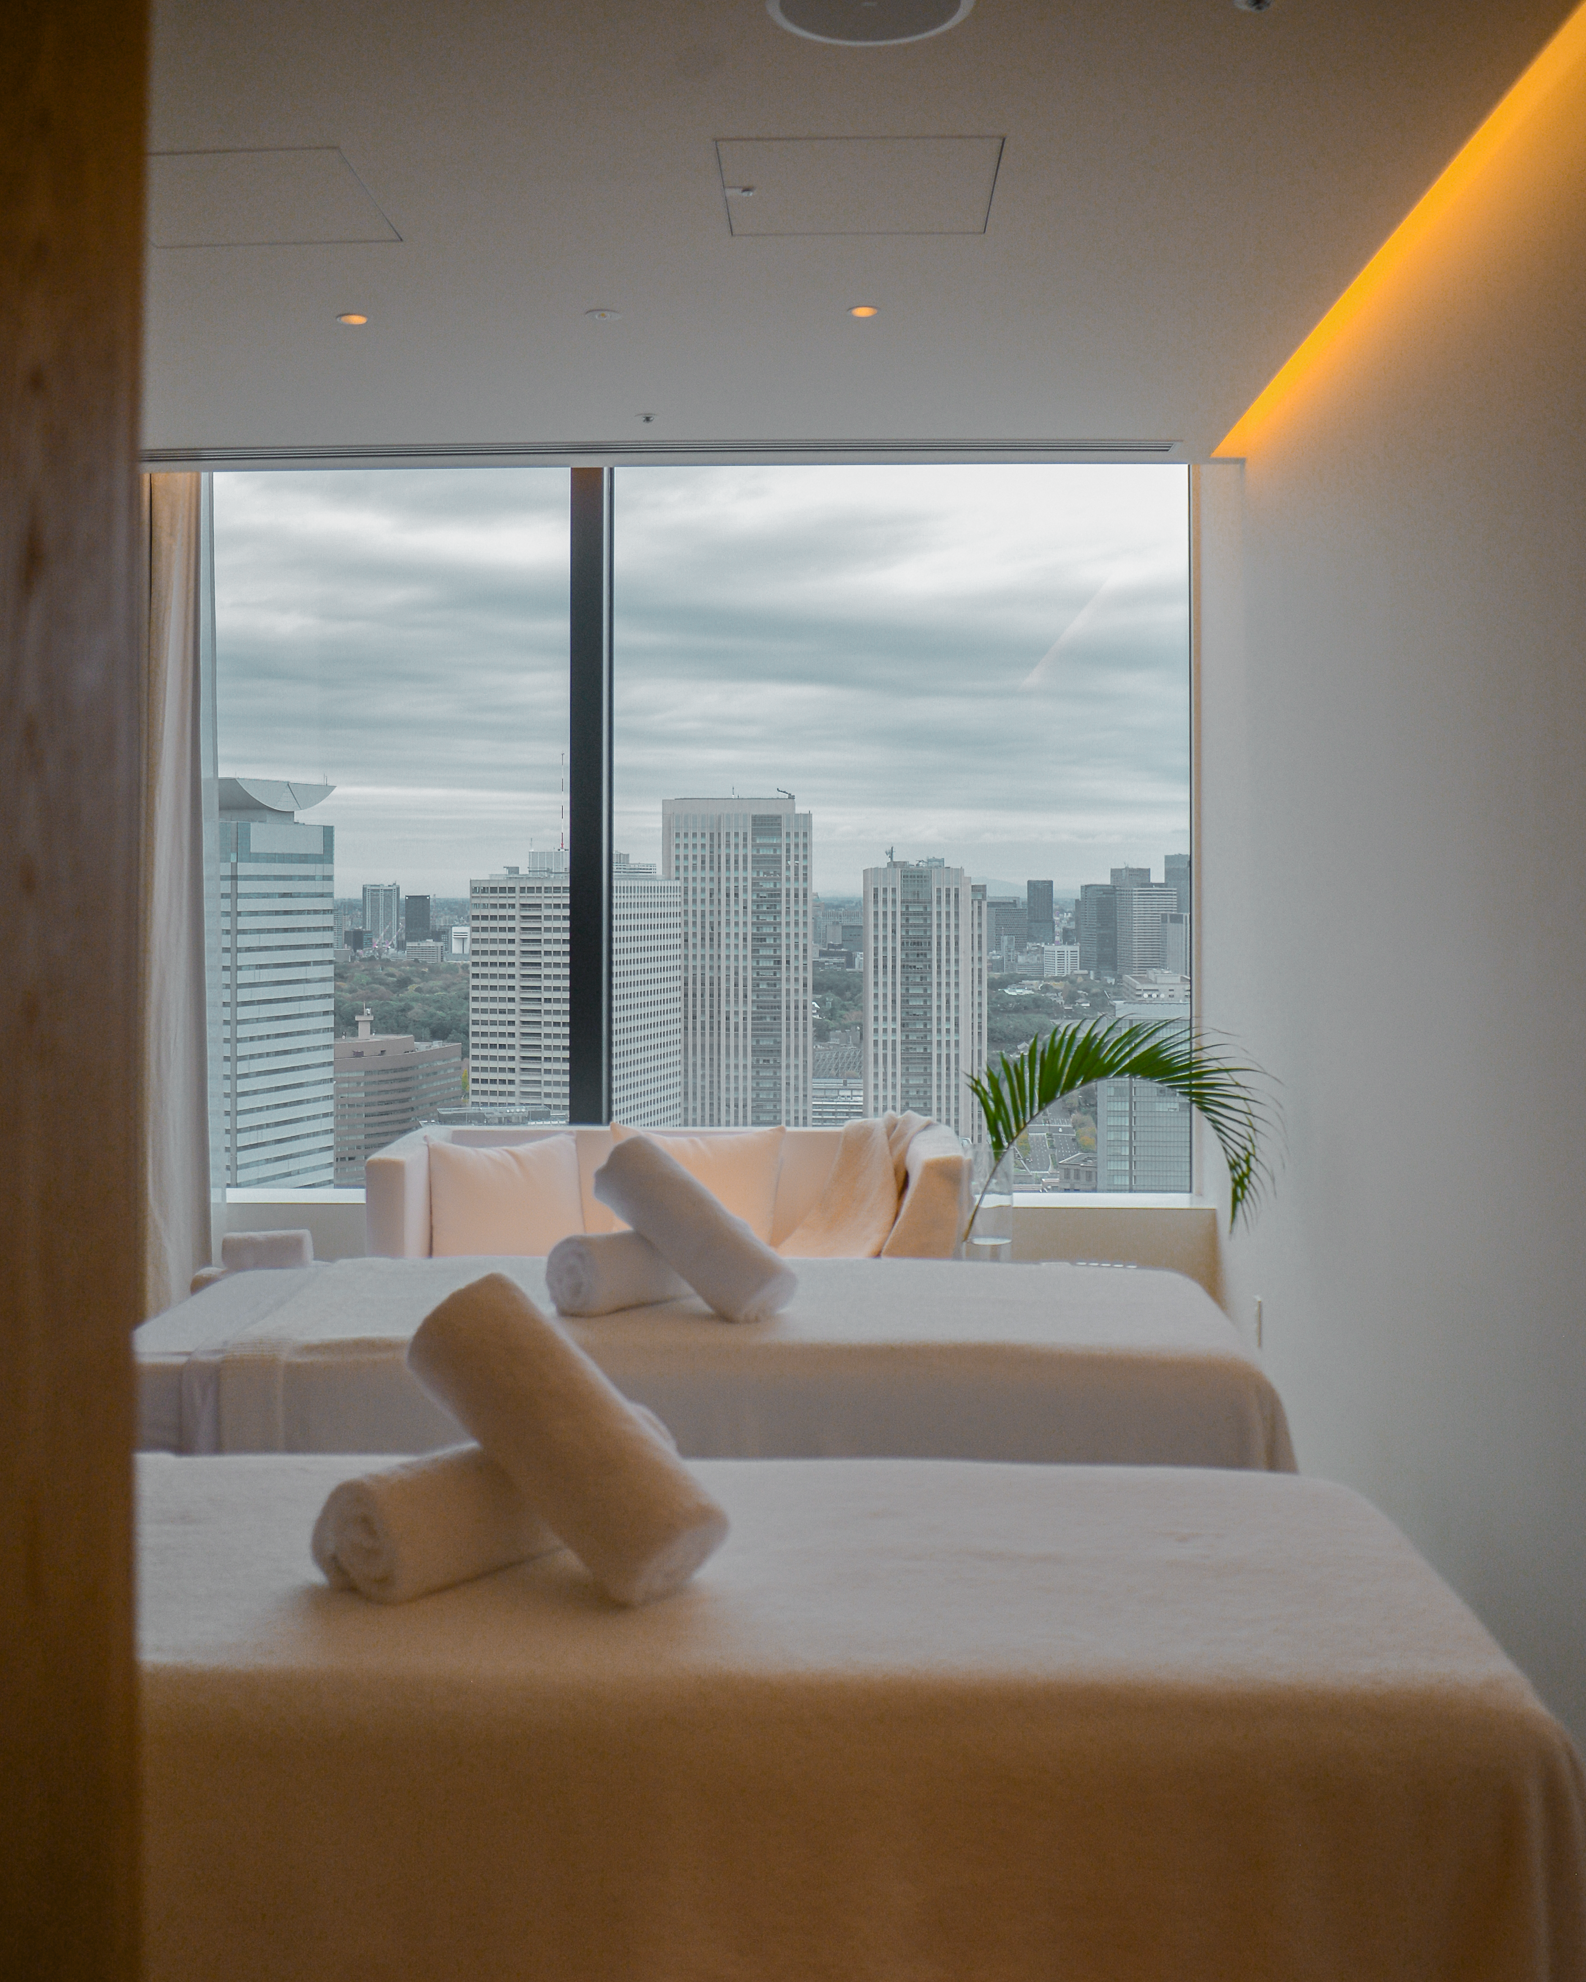 Couple spa room at Tokyo EDITION Toranomon, Best new hotel in Tokyo 2020, Staycation at the Tokyo Edition Toranomon,  hotel staycation in Tokyo, Japan newest hotels, Tokyo Tower view hotels in Japan, best Tokyo skyline view with Tokyo Tower / FOREVERVANNY Travel and Style by Van Le